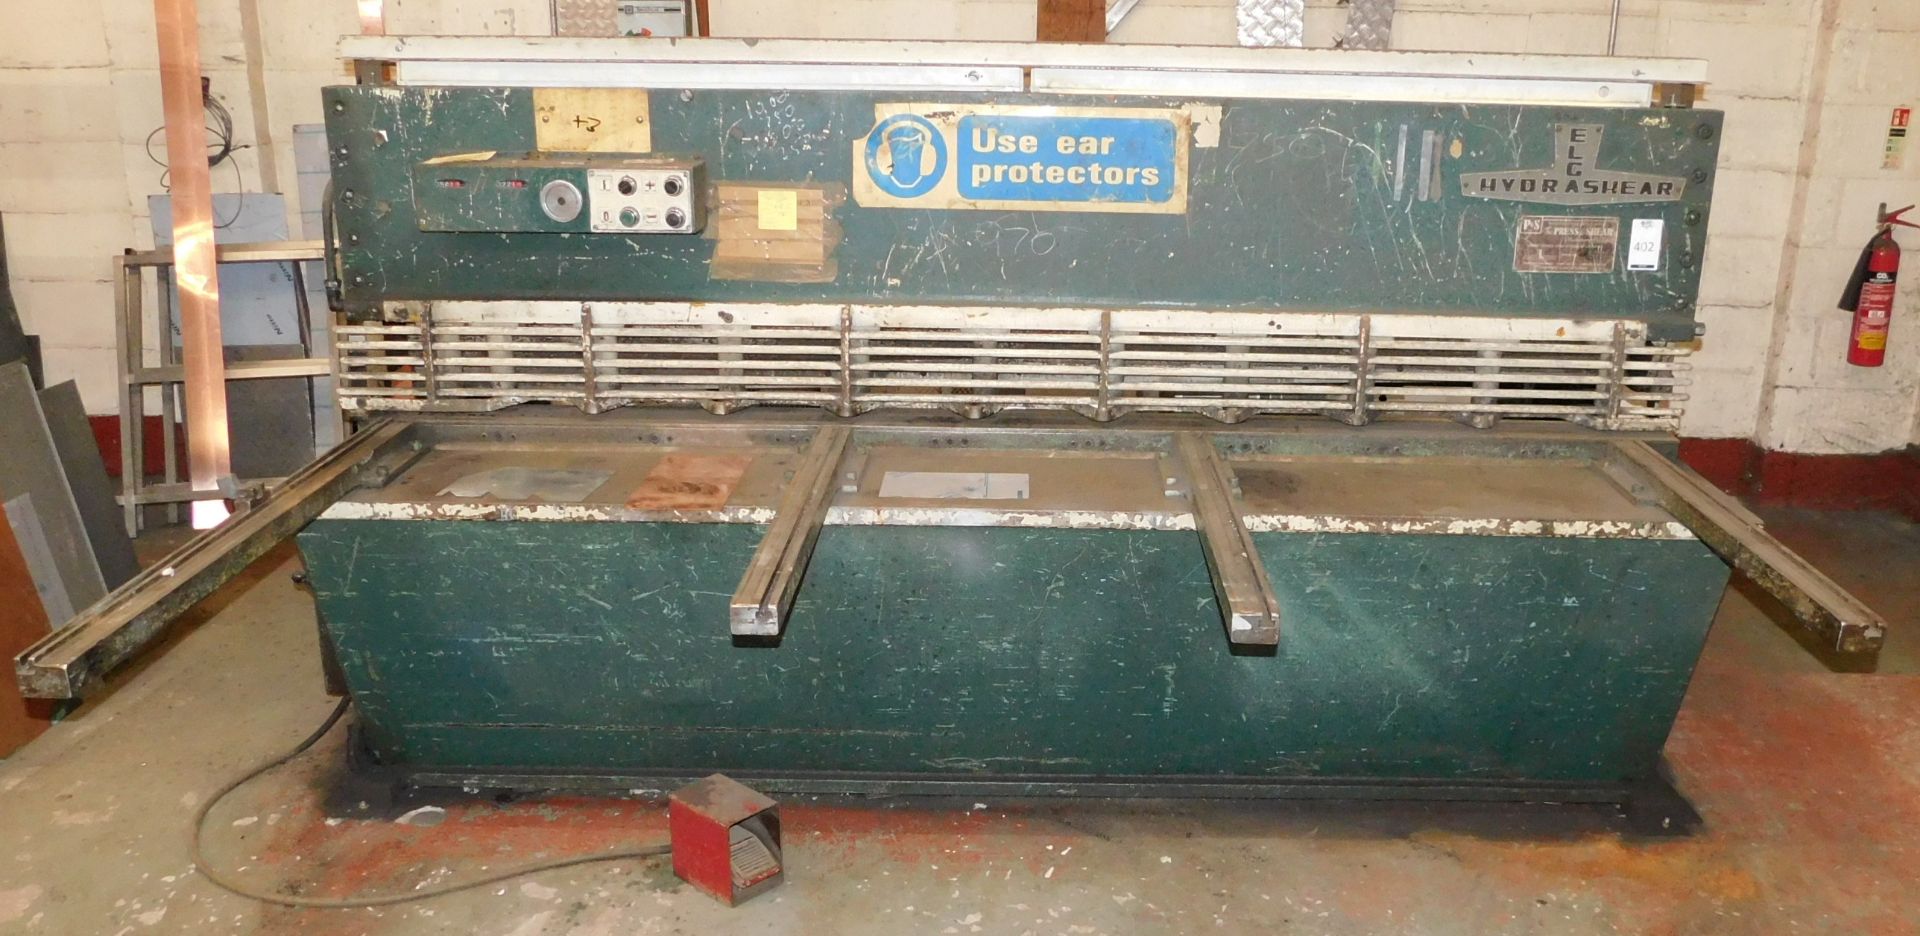 Elga Hydrashear Guillotine, Serial Number; 814M66525, Manufactured by The Press & Shear Machinery Co